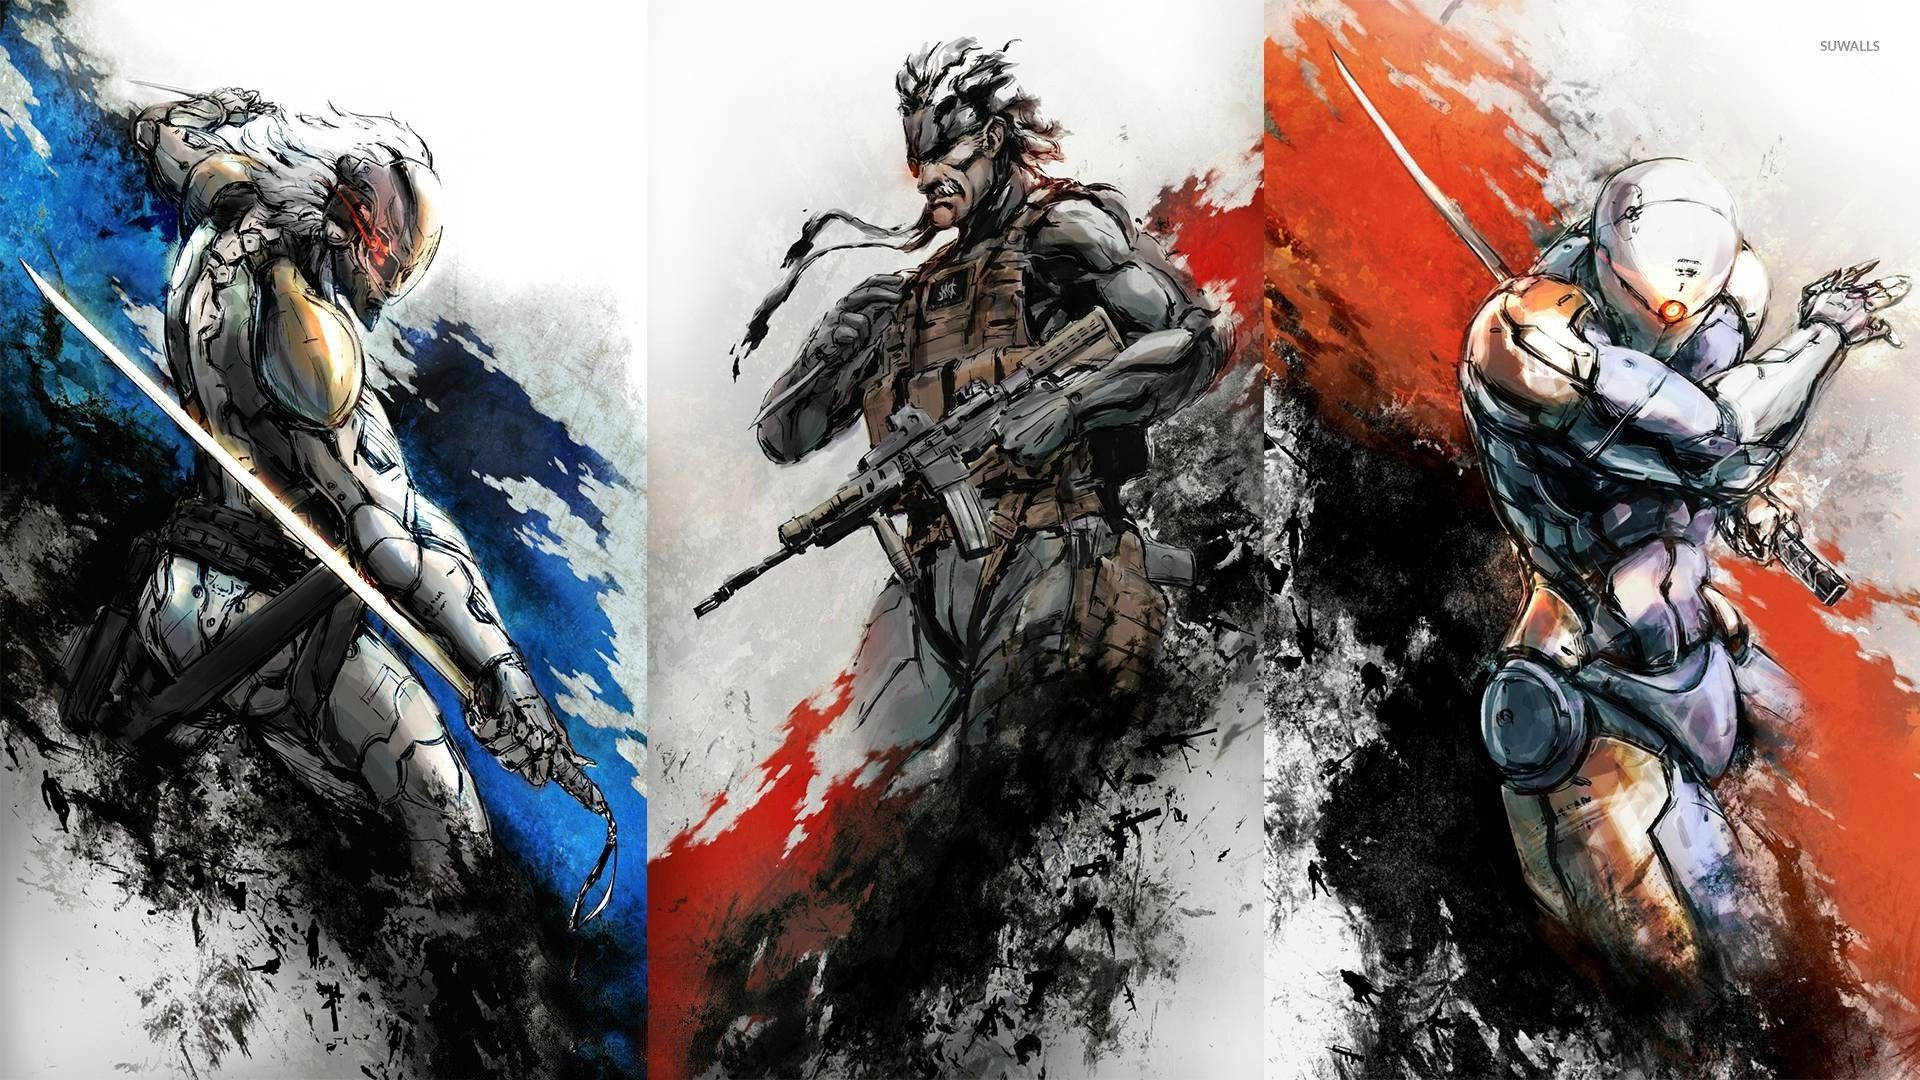 Snake and his team of Ninjas ready for action in Metal Gear Solid Wallpaper